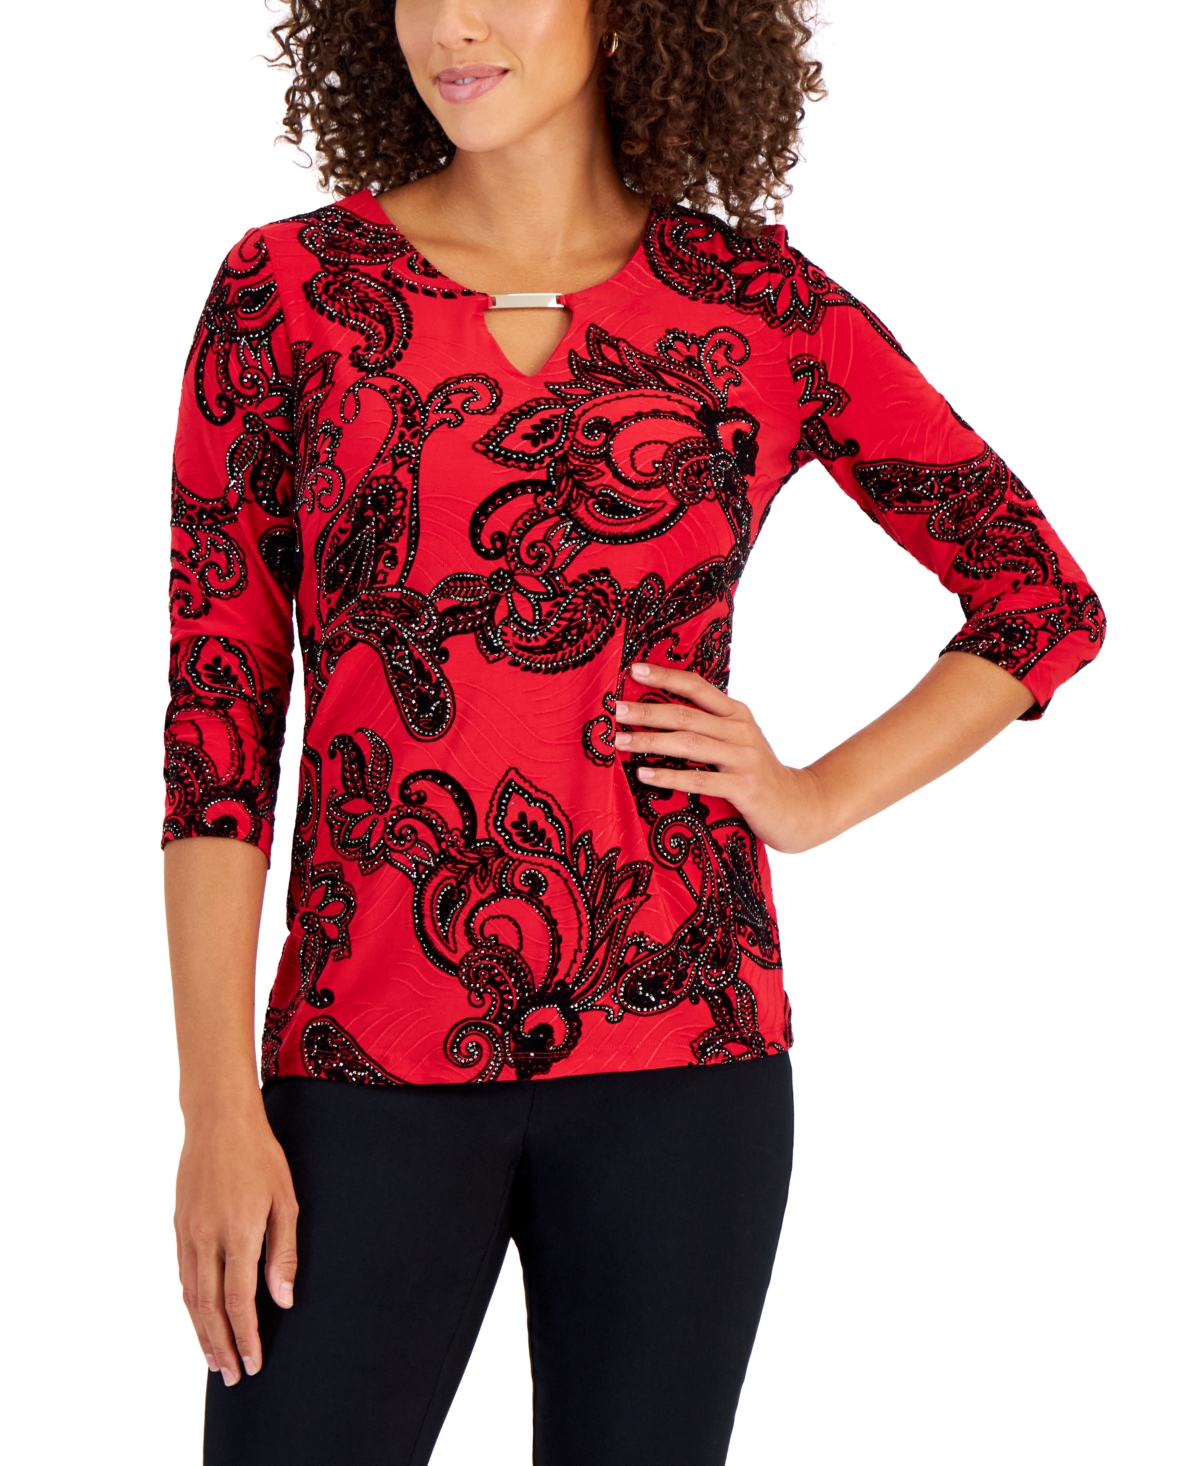 Women's Embellished Jacquard Keyhole Top, Created for Macy's - Real Red Combo